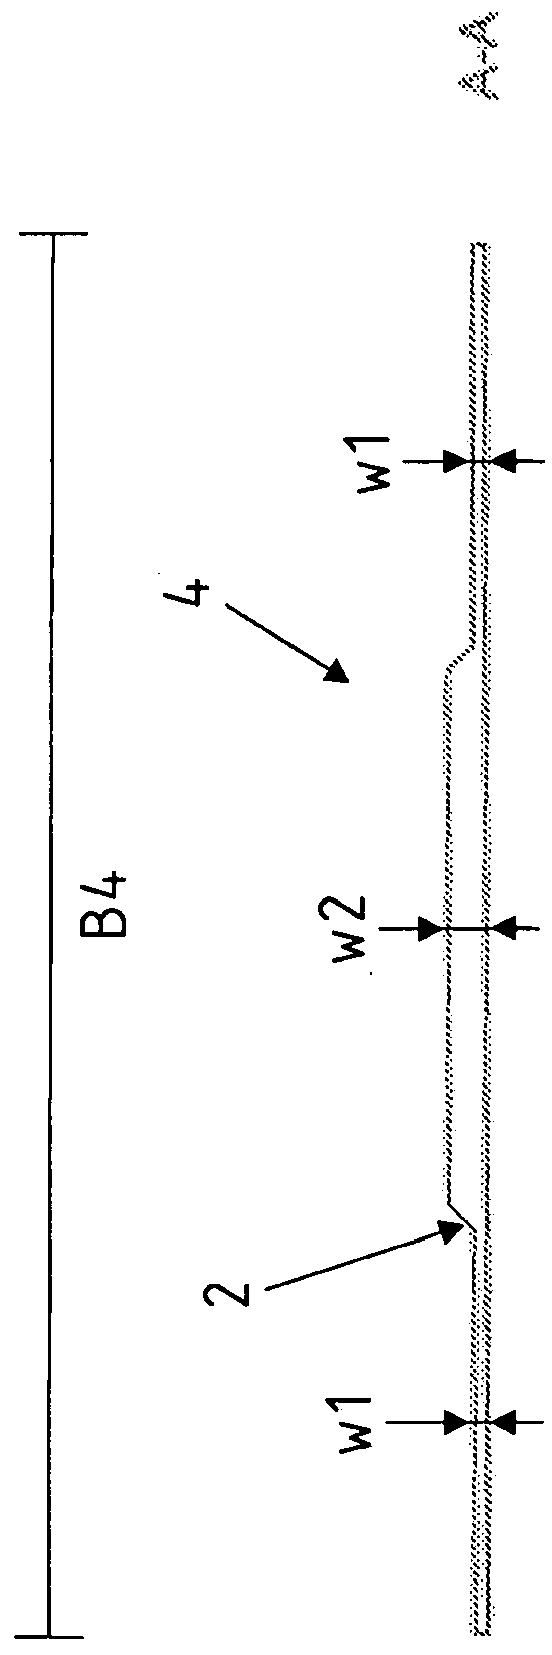 Method for the manufacture of motor vehicle components from extruded aluminum profiles